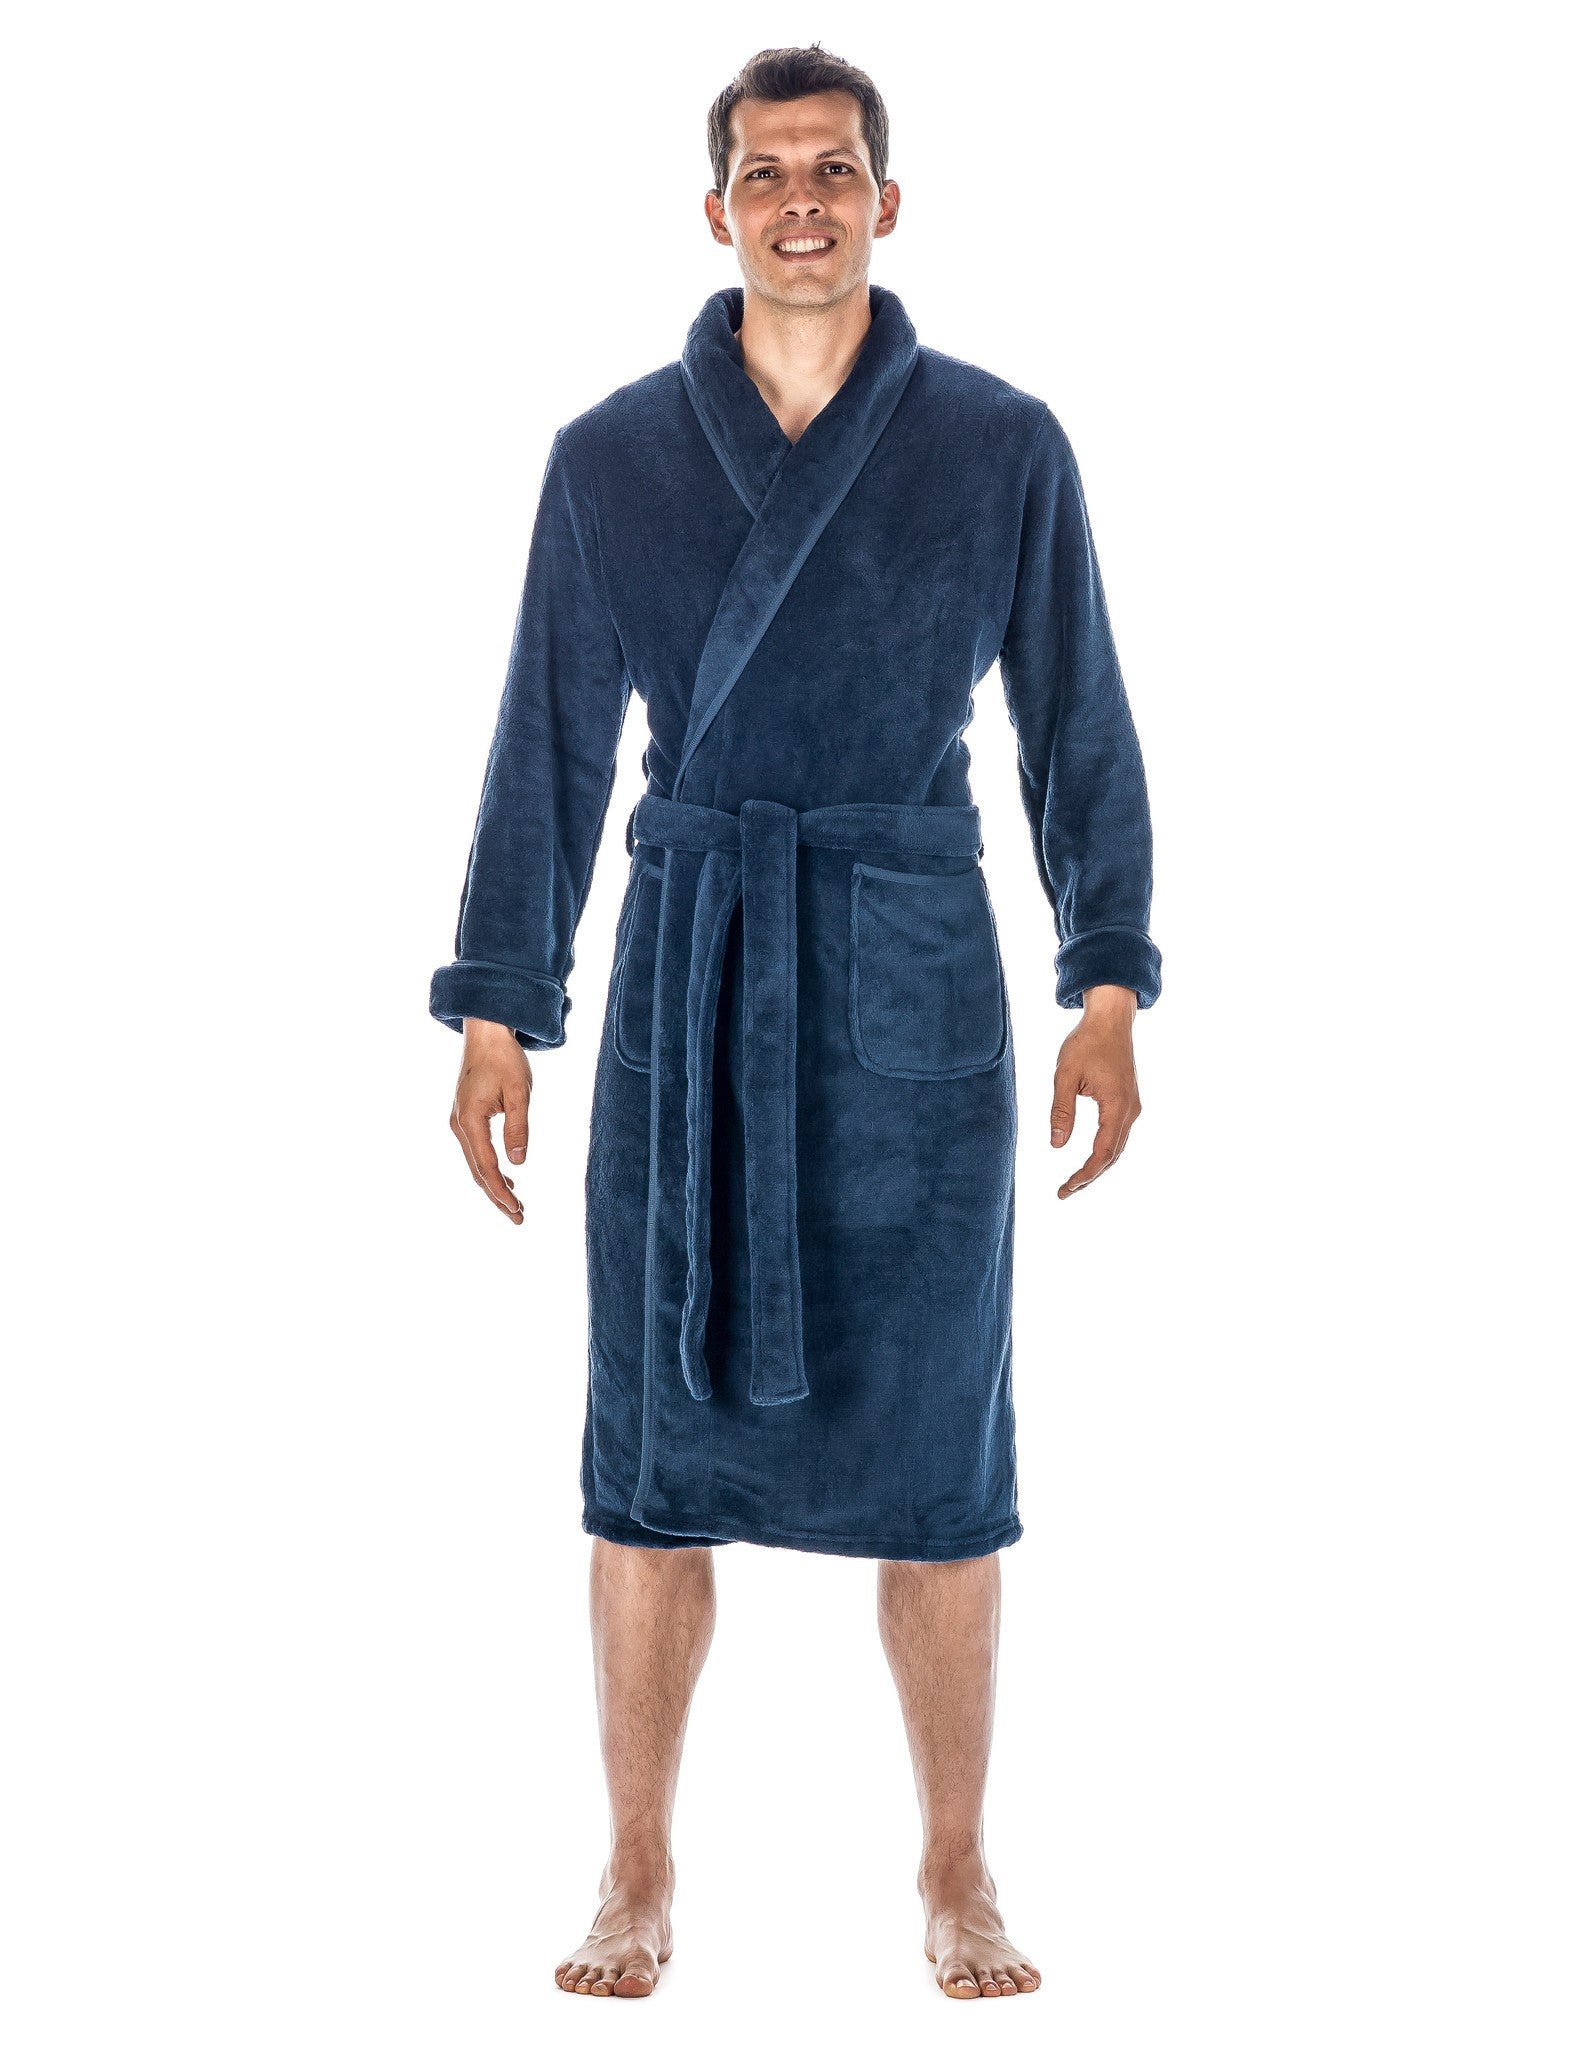 Buy Bench Mens Mostyn Check Fleece Hooded Dressing Gown Navy/Check